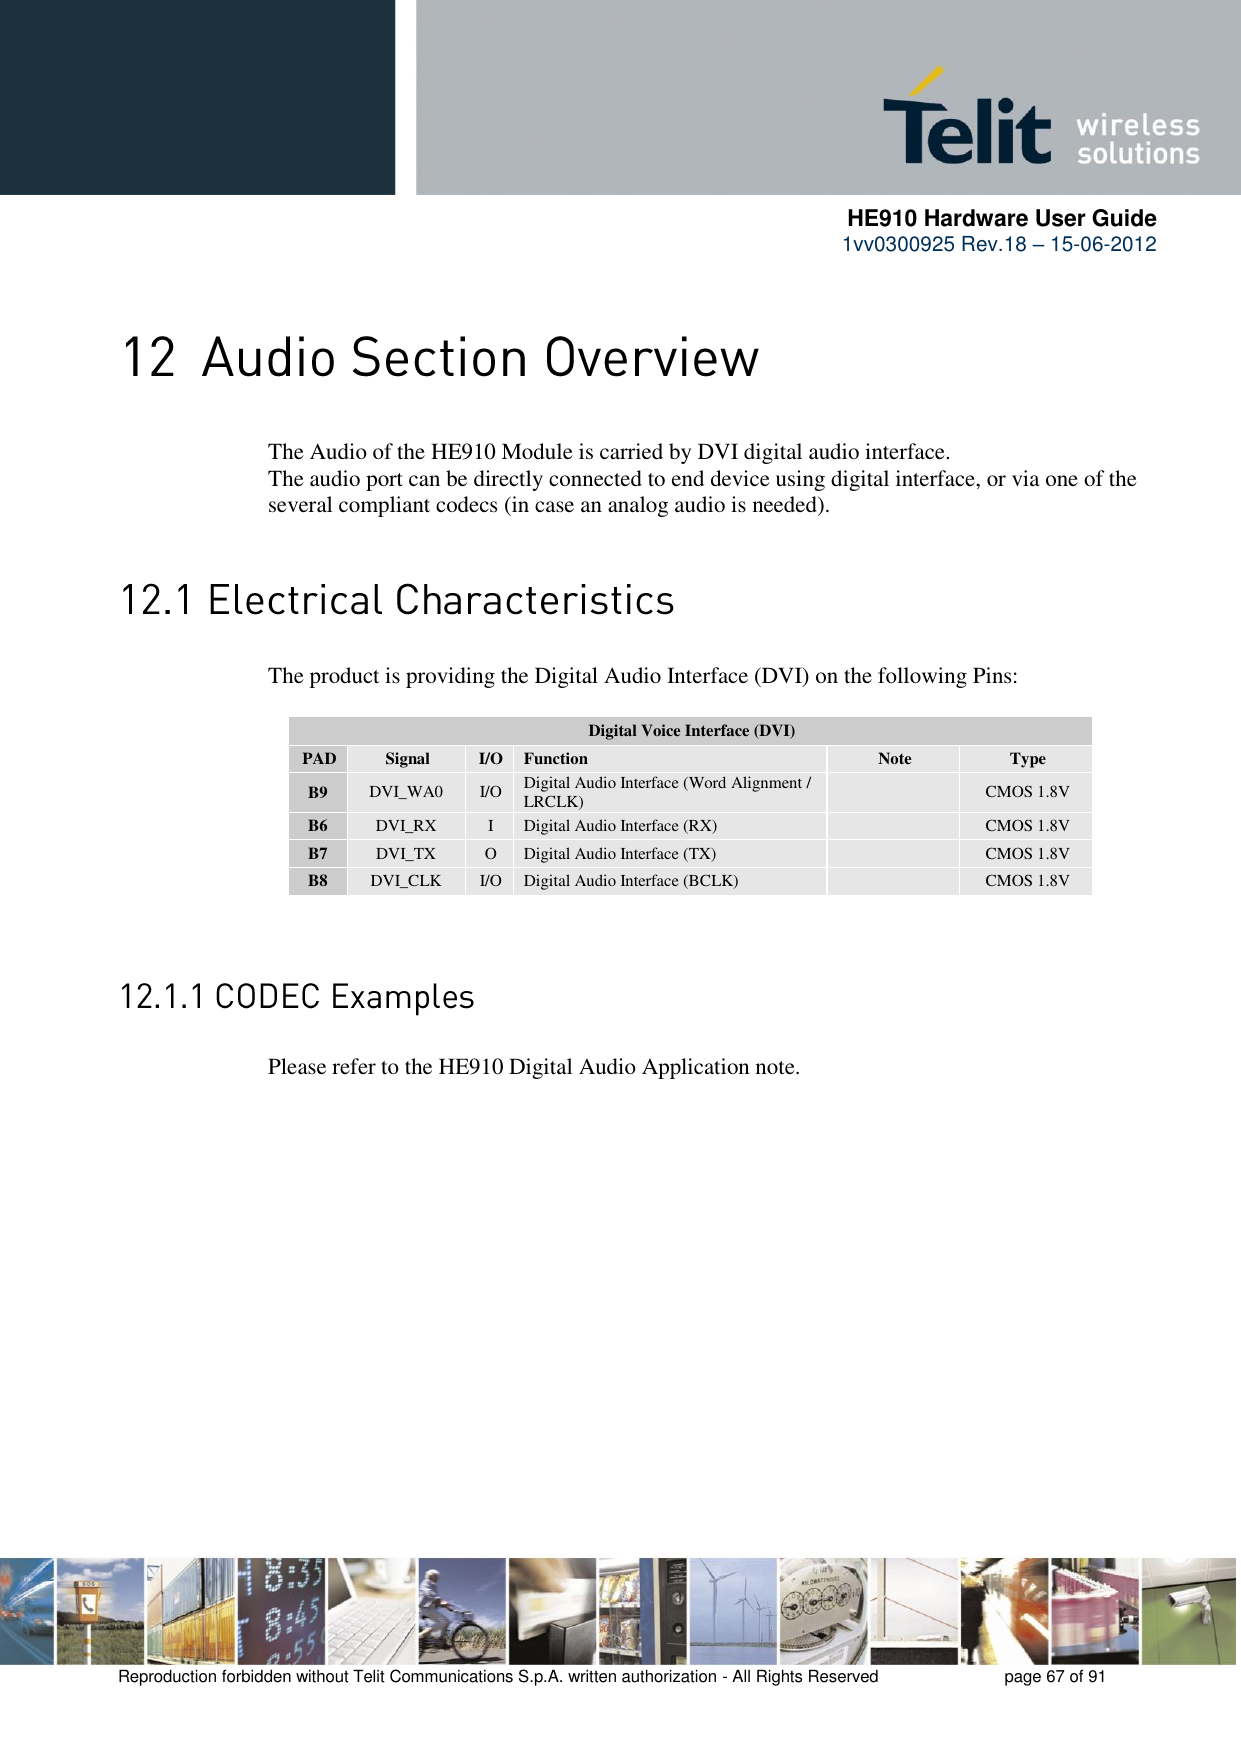      HE910 Hardware User Guide 1vv0300925 Rev.18 – 15-06-2012    Reproduction forbidden without Telit Communications S.p.A. written authorization - All Rights Reserved    page 67 of 91   The Audio of the HE910 Module is carried by DVI digital audio interface. The audio port can be directly connected to end device using digital interface, or via one of the several compliant codecs (in case an analog audio is needed).  The product is providing the Digital Audio Interface (DVI) on the following Pins:  Digital Voice Interface (DVI) PAD Signal I/O Function Note Type B9 DVI_WA0 I/O Digital Audio Interface (Word Alignment / LRCLK)  CMOS 1.8V B6 DVI_RX I Digital Audio Interface (RX)  CMOS 1.8V B7 DVI_TX O Digital Audio Interface (TX)  CMOS 1.8V B8 DVI_CLK I/O Digital Audio Interface (BCLK)  CMOS 1.8V    Please refer to the HE910 Digital Audio Application note. 